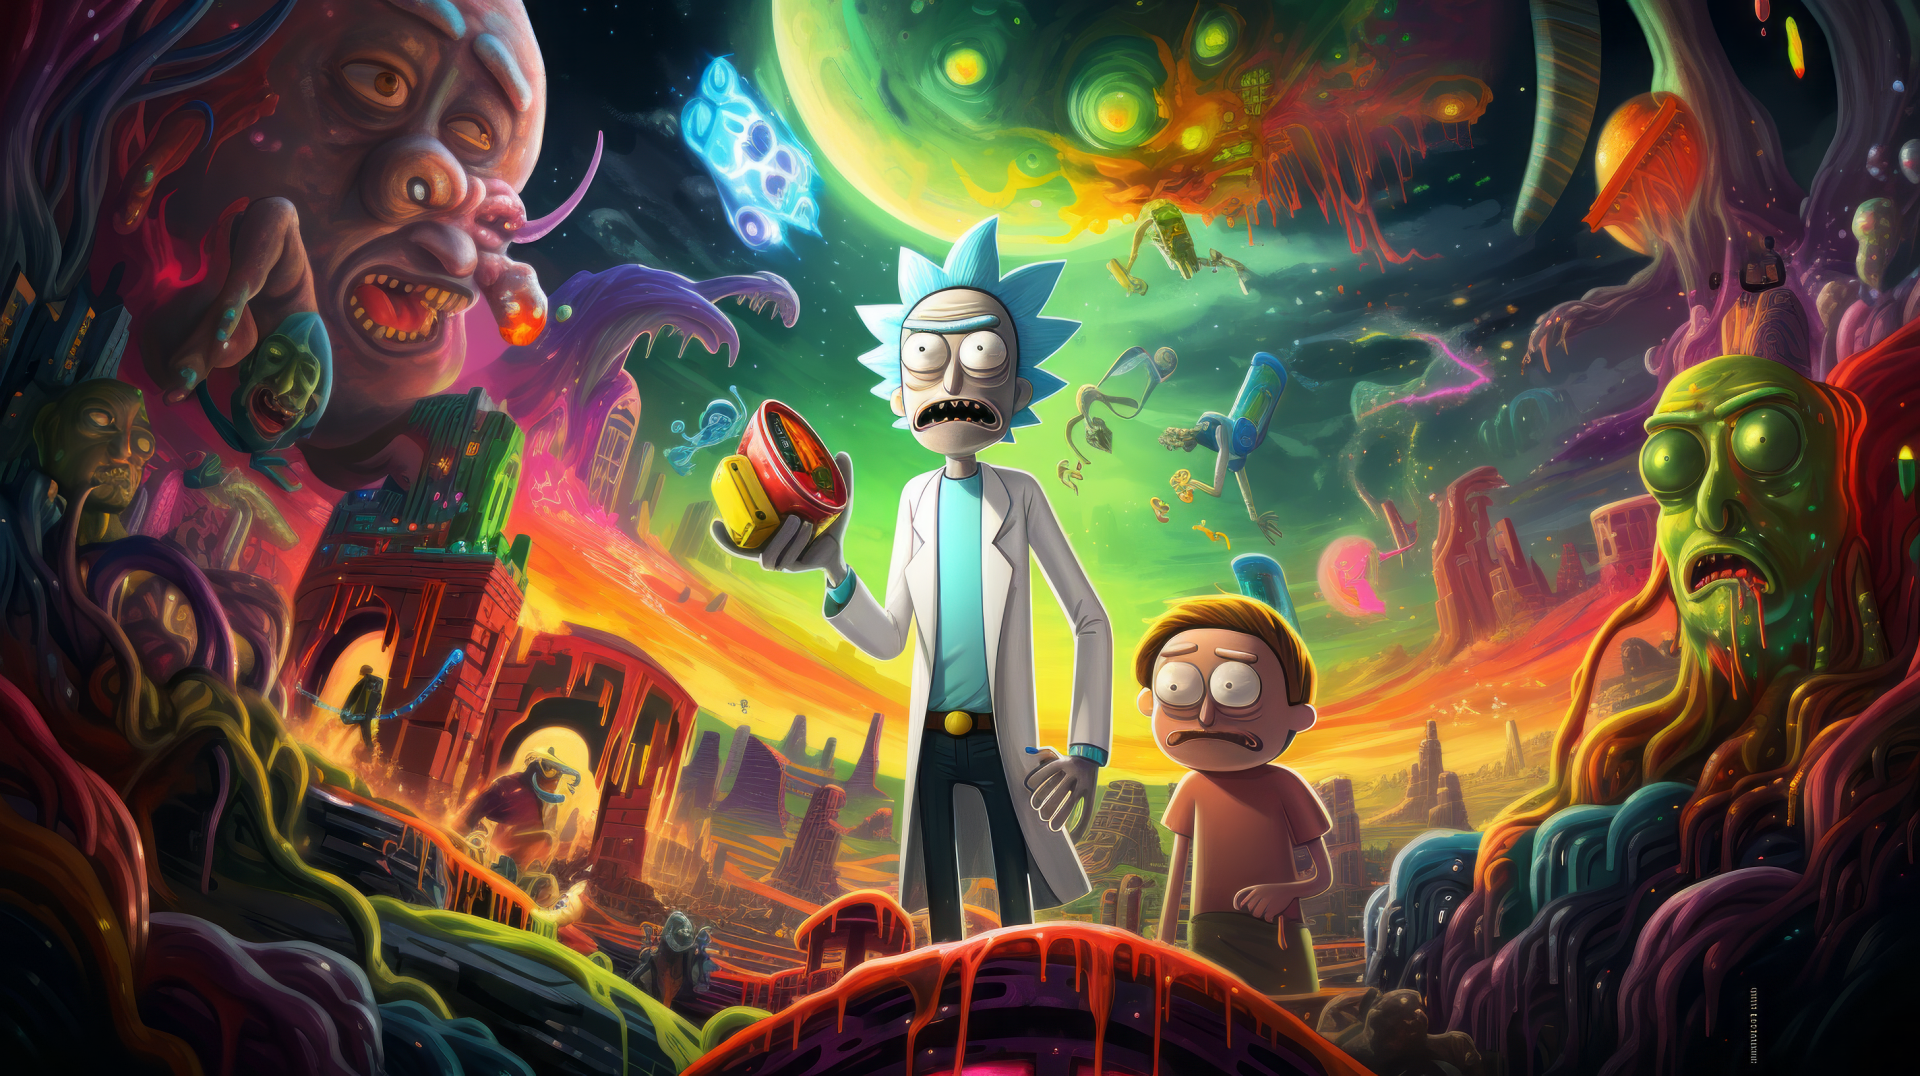 Rick And Morty 4K Wallpapers - Wallpaper Cave